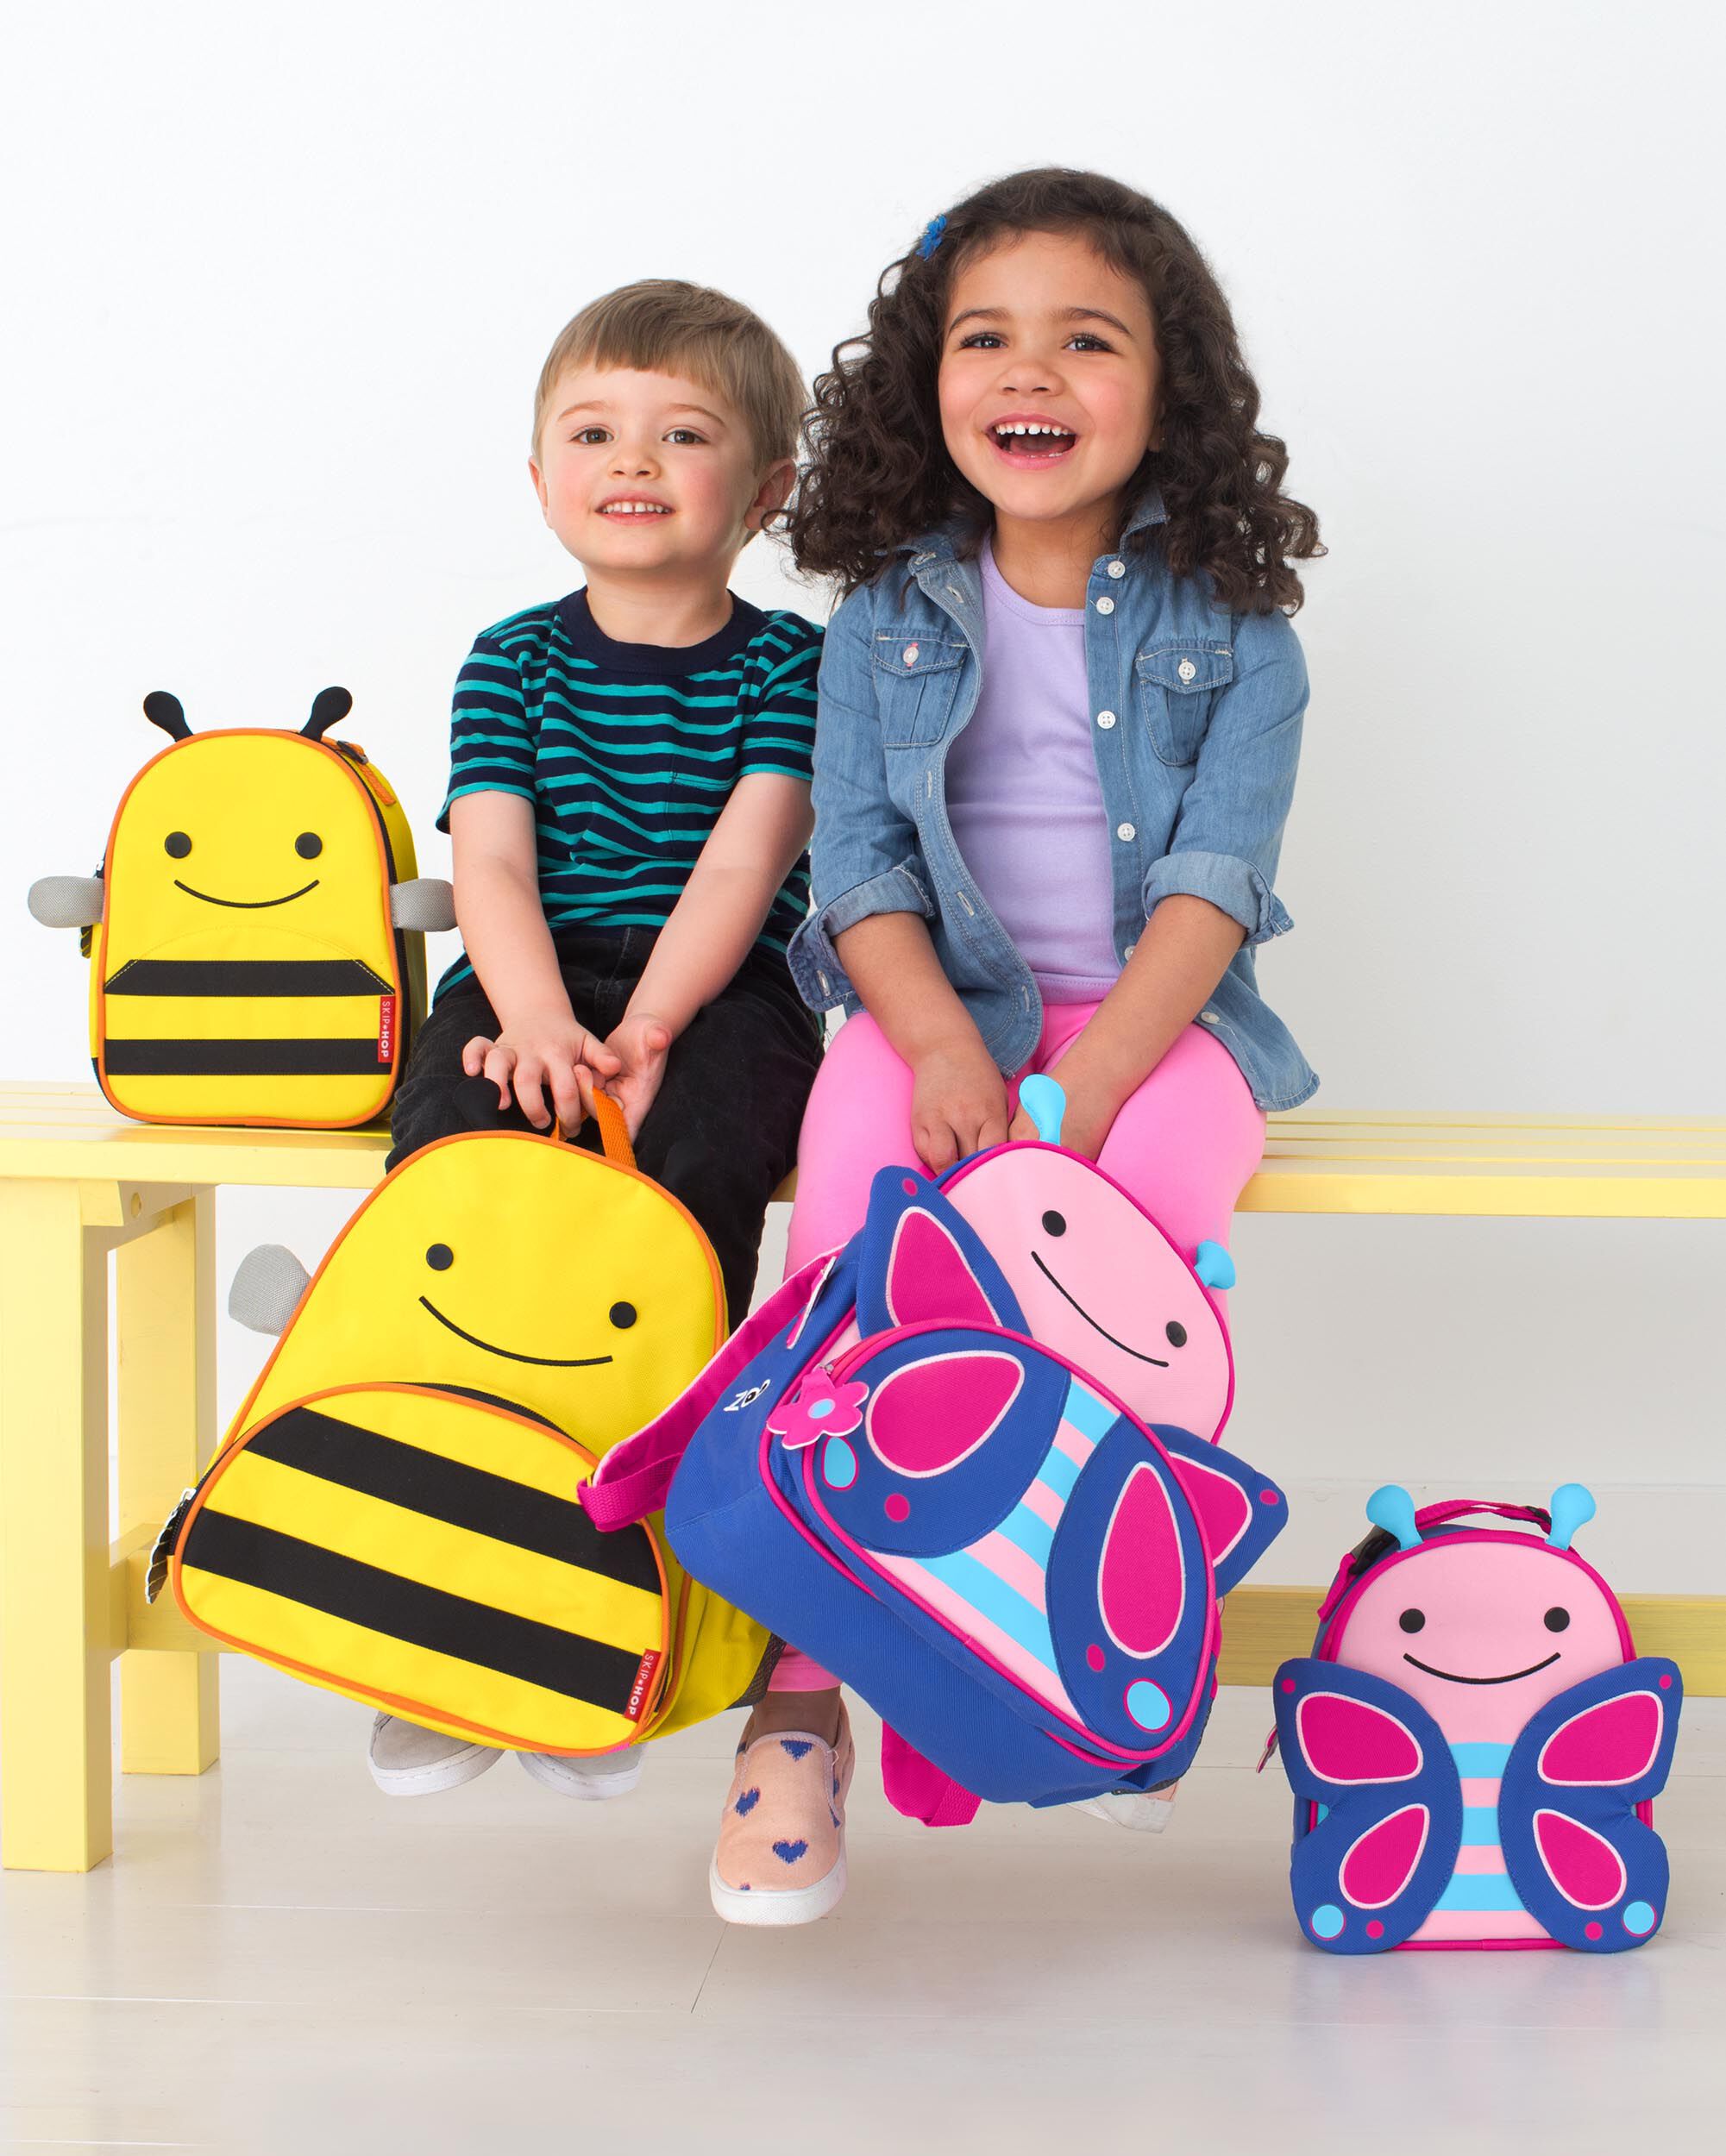 Skip Hop ZOO LITTLE KID BACK PACK BUTTERFLY Kids Clothes Bags BNIP 